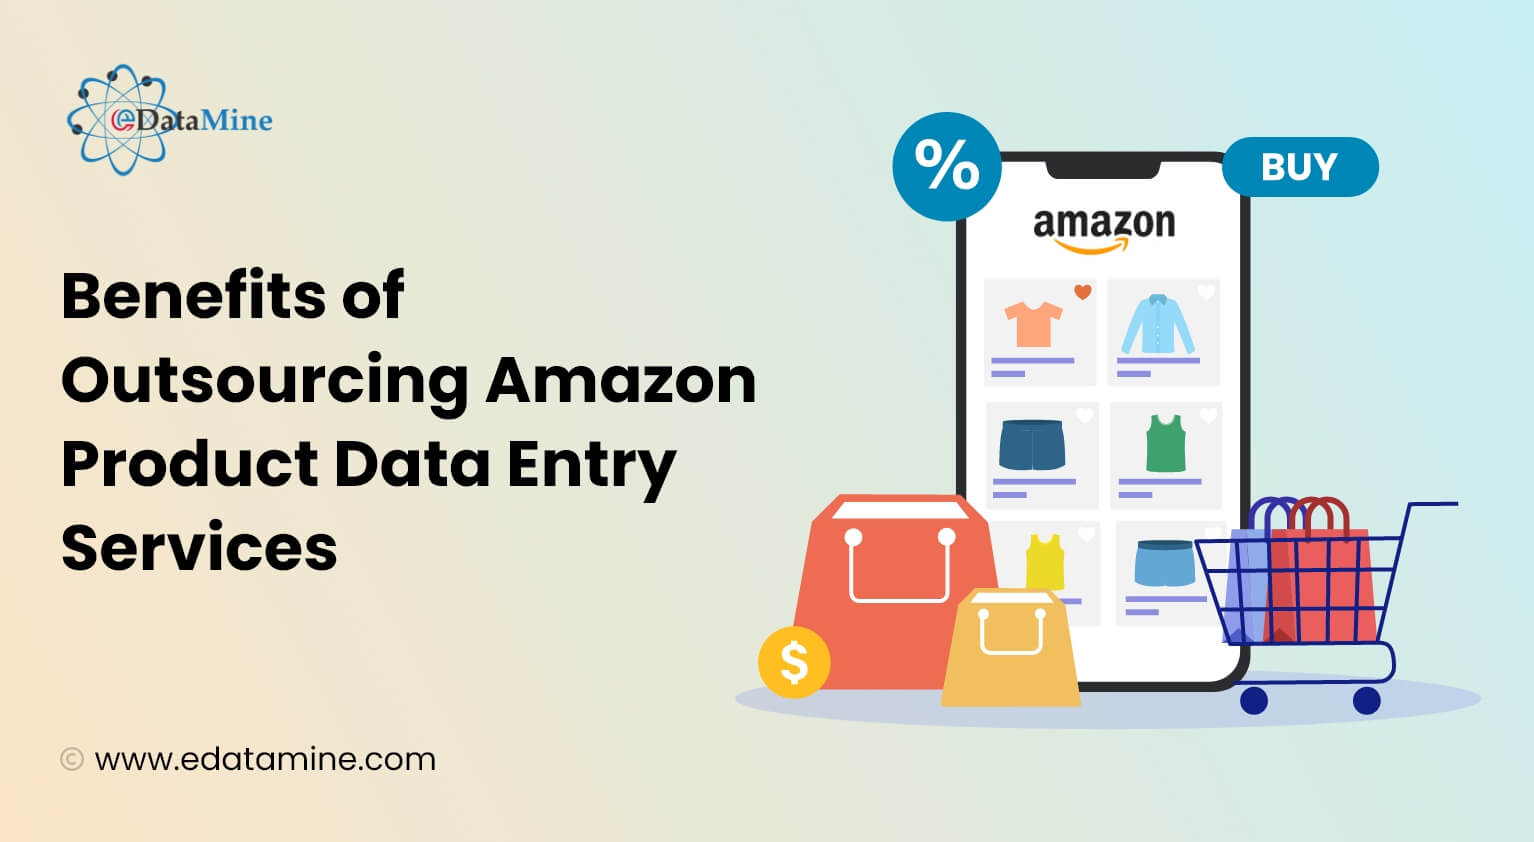 Benefits of Outsourcing Amazon Product Data Entry Services